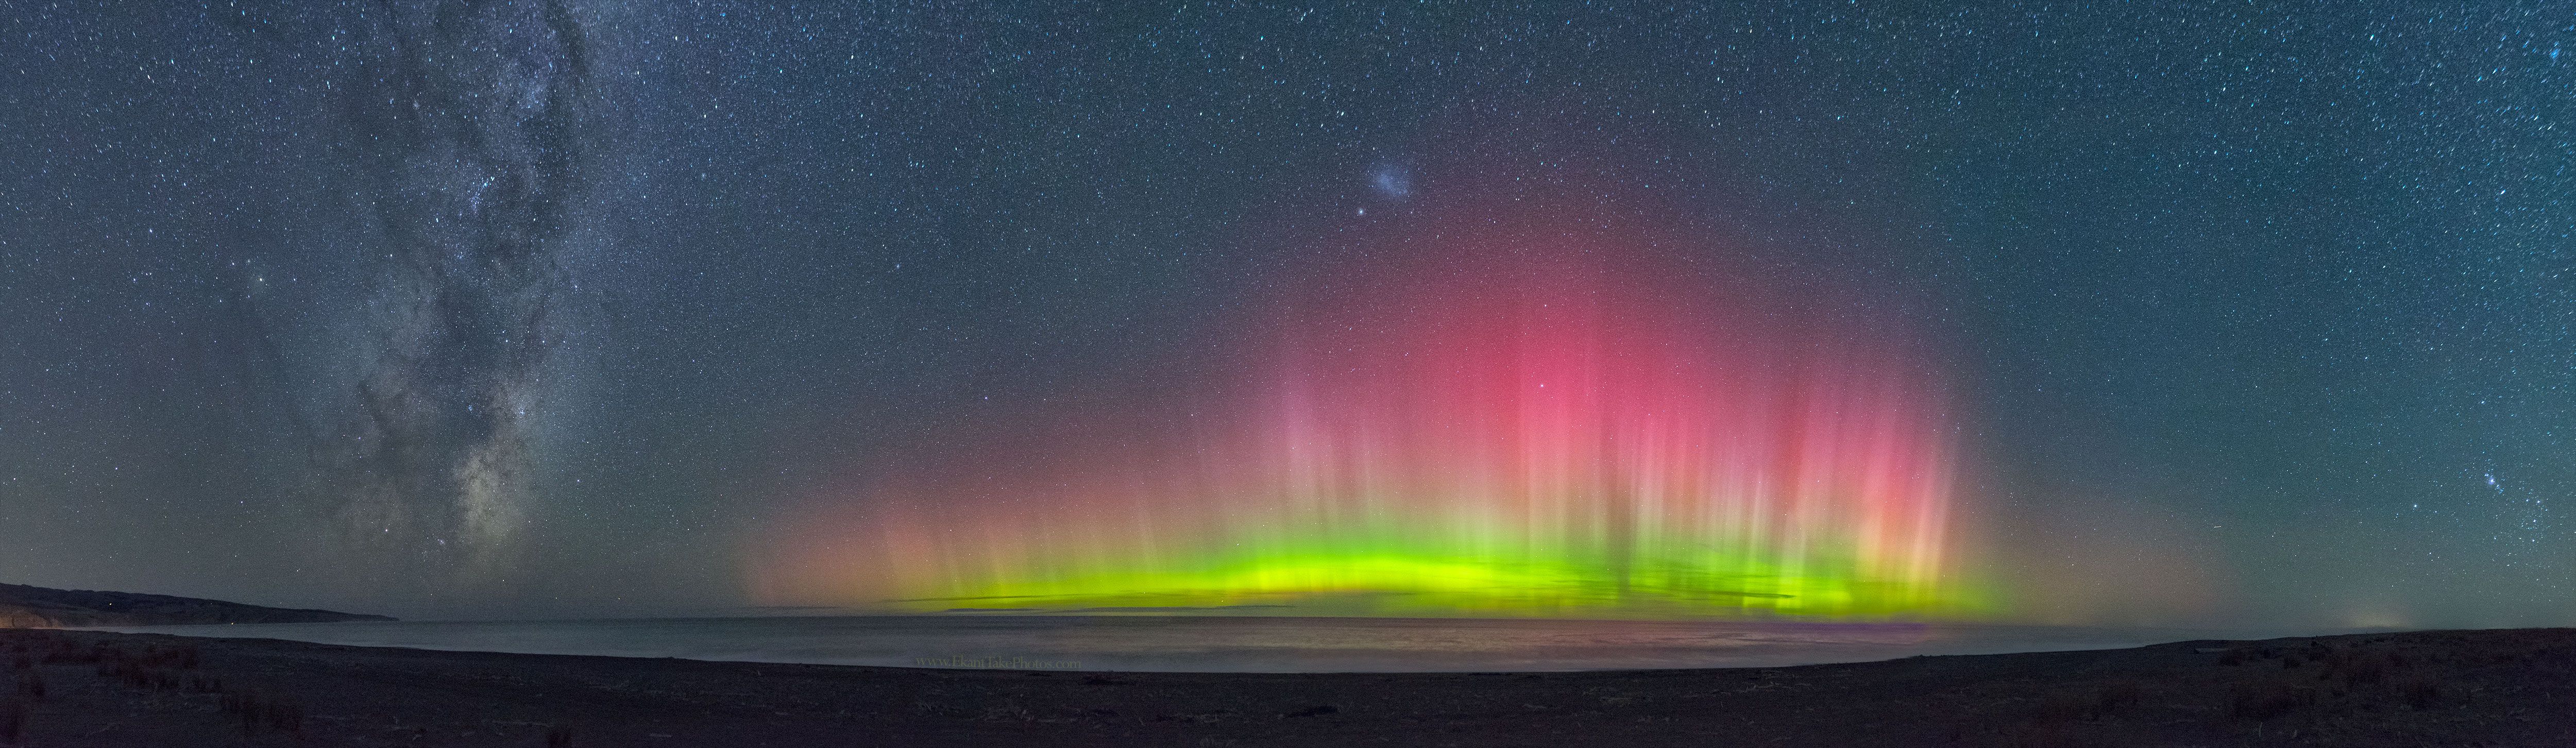 Photographing Aurora – Reality vs Expectation - DIY Photography